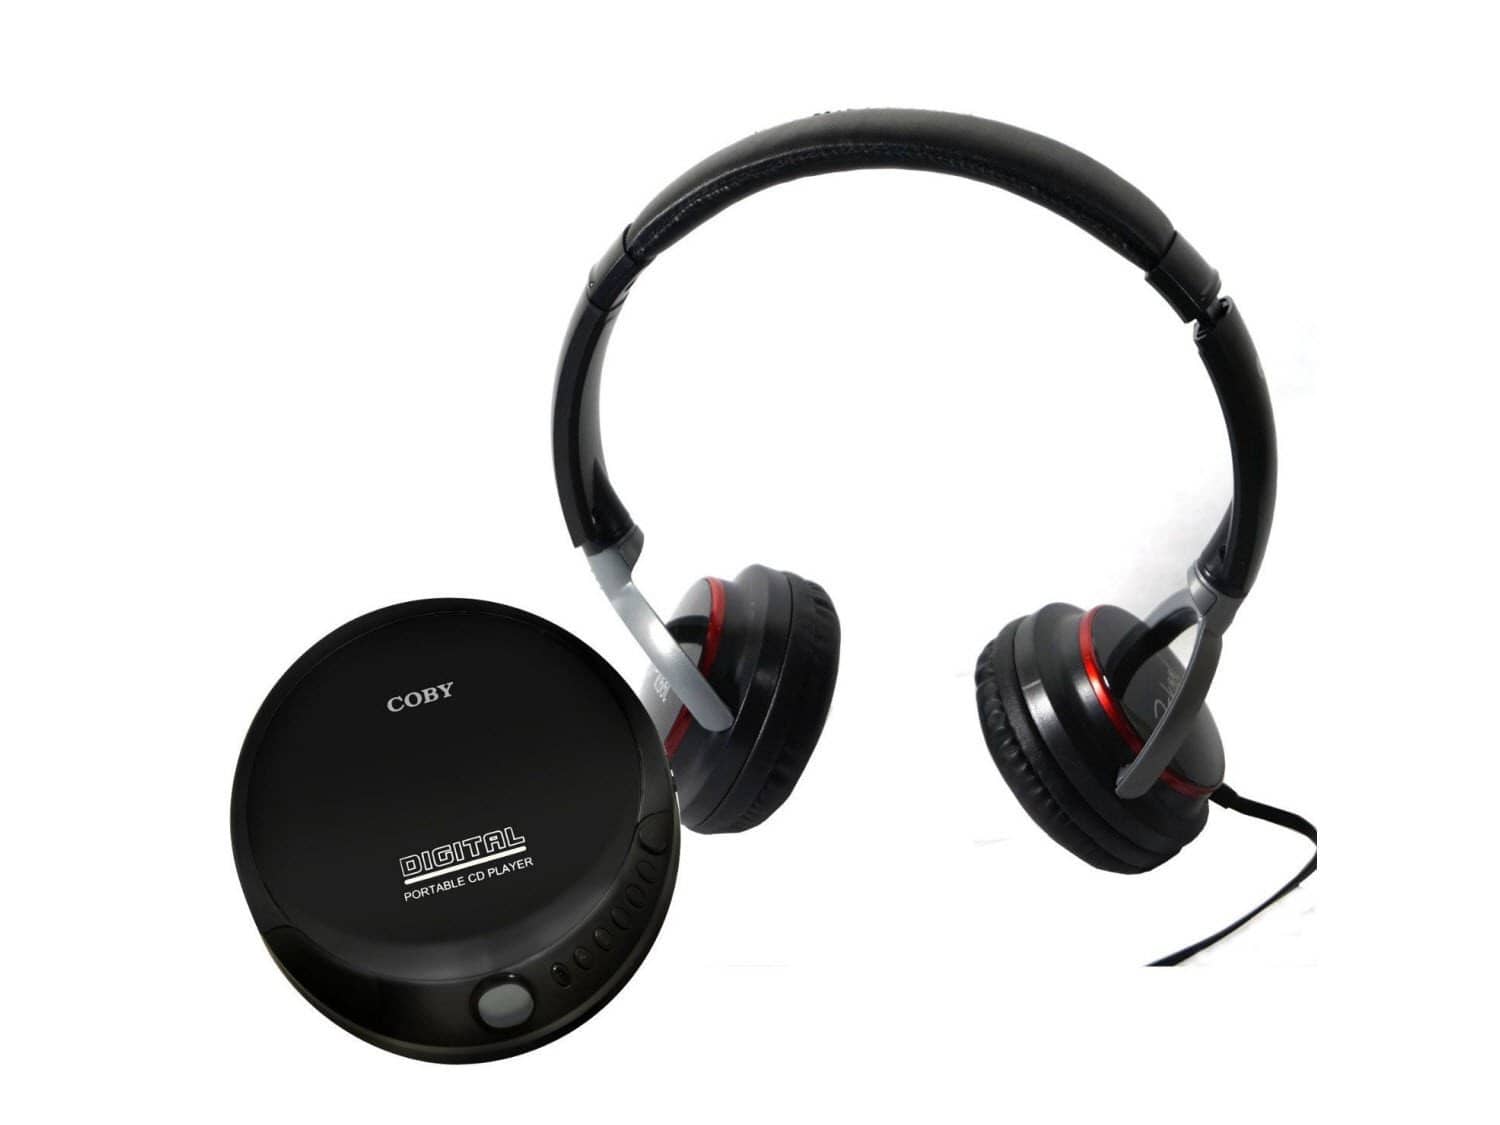 Coby Portable Compact CD Player Headphones - Black